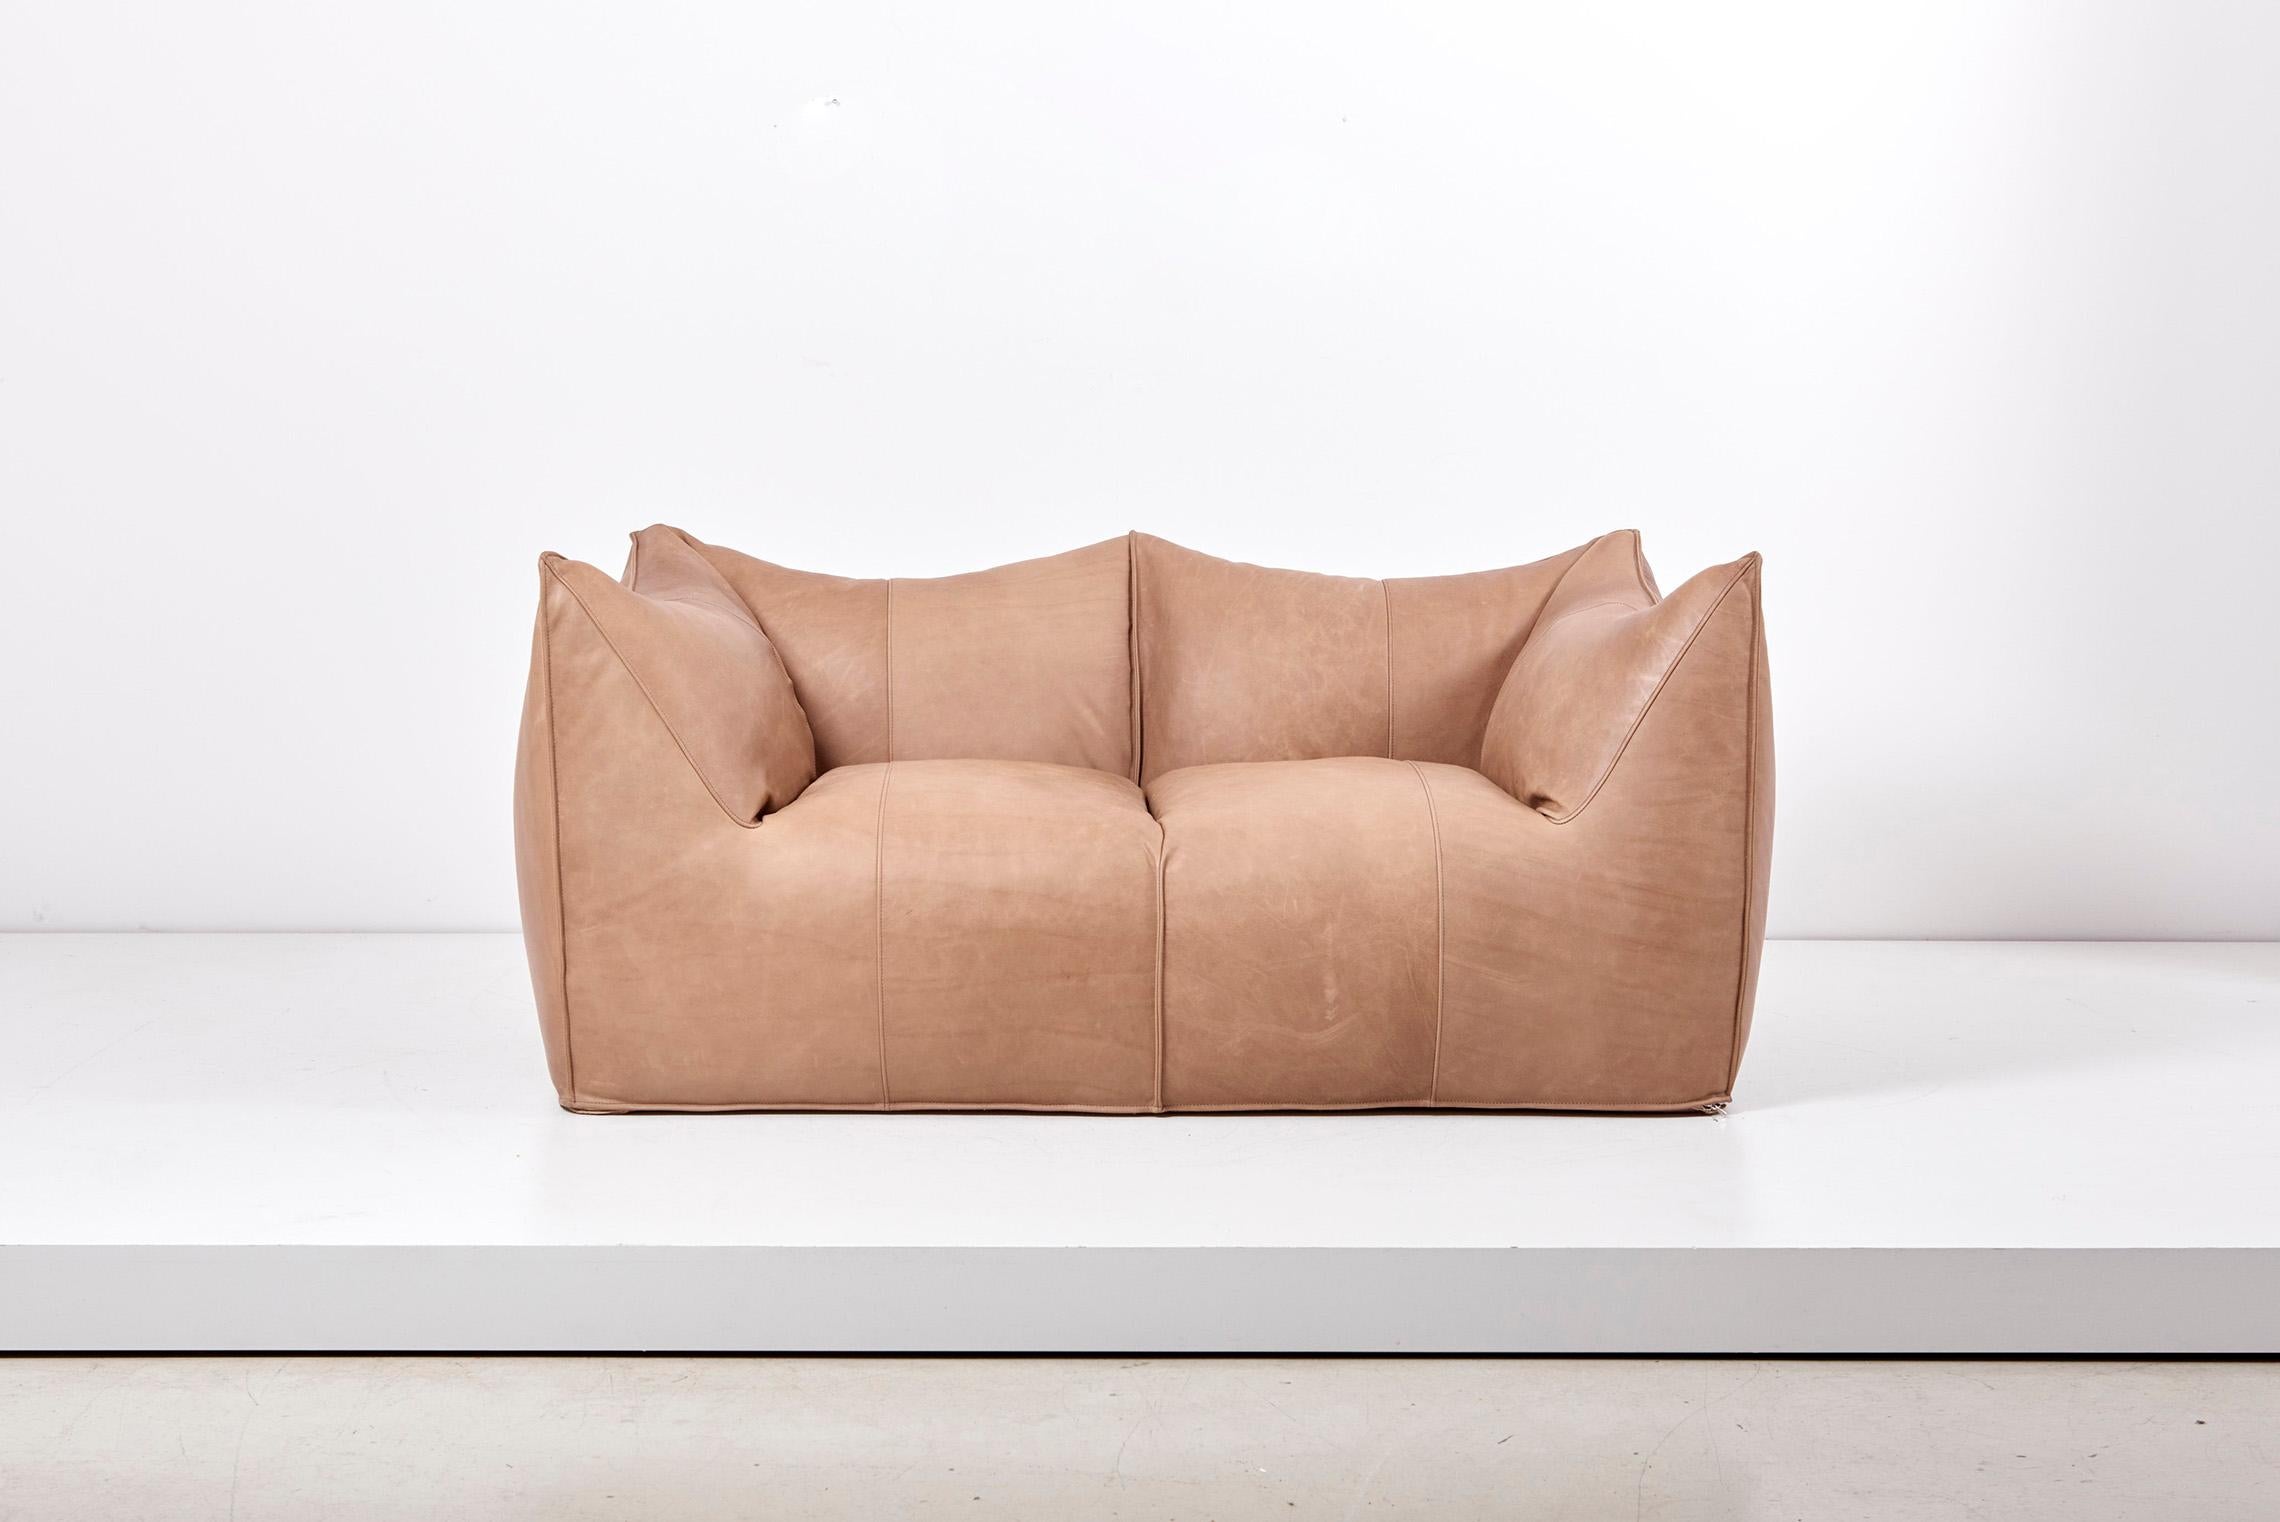 'Le Bambole' 2-seat sofa, designed in 1970s by Mario Bellini and manufactured by B&B Italia in Italy.
New upholstered in a mud brown aniline leather.